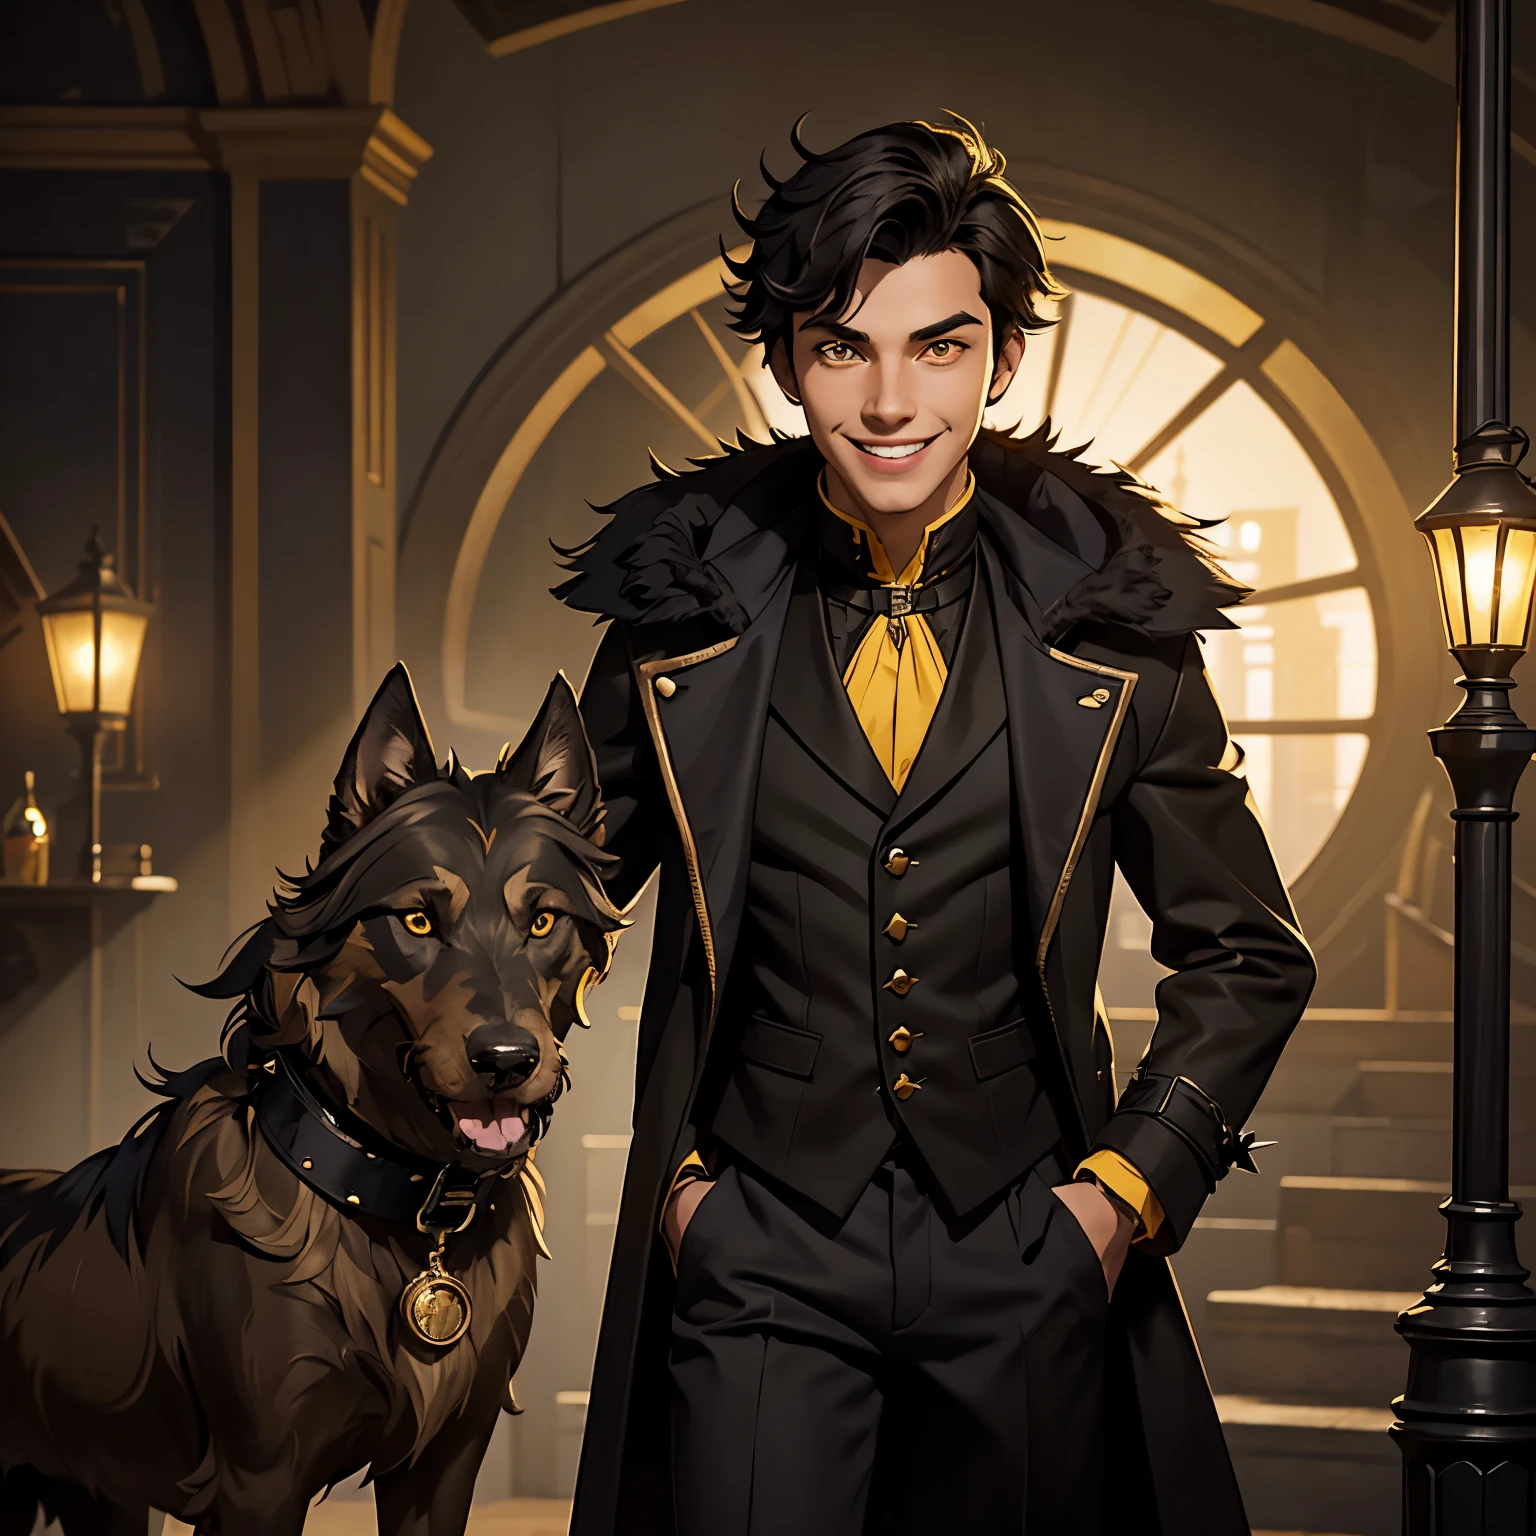 1 yong smile, teenager, boy, young, aristocrat, black short hair with spikes, dark yellow vest, brown/black dusty disheveled coat, yellow eyes, collar around the neck, cane with mace tip, a huge Irish wolfhound nearby, Black Style, easy going, Grinning, smile, torn coat